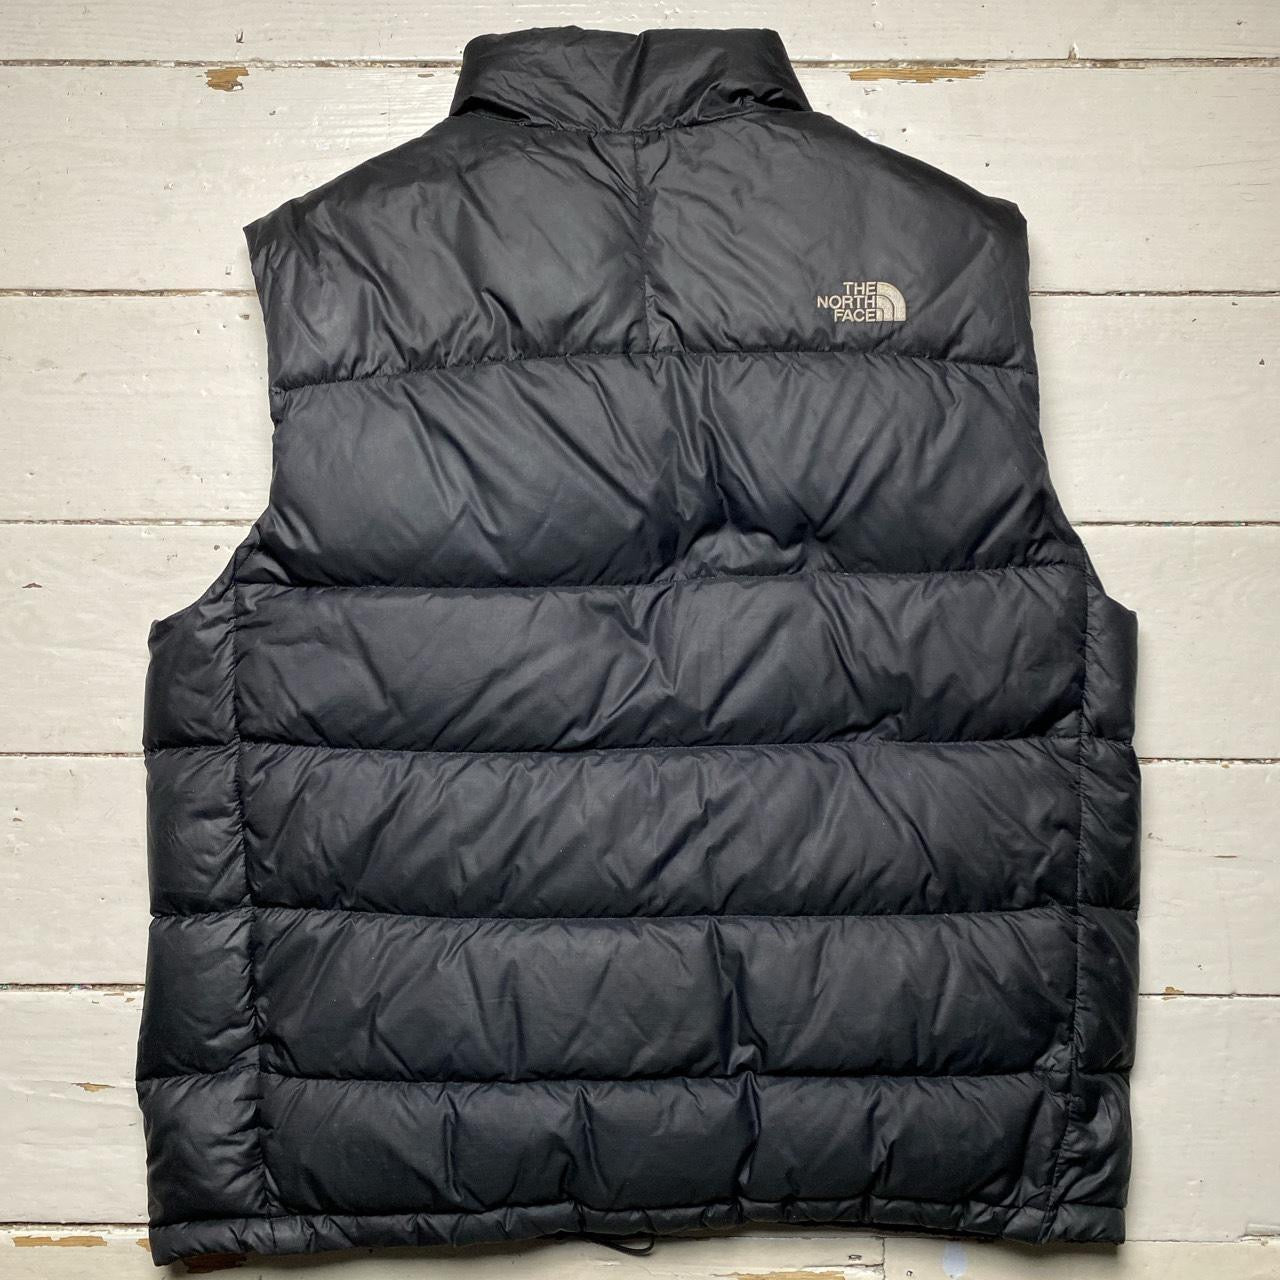 The North Face Gilet 700 Series (XL)